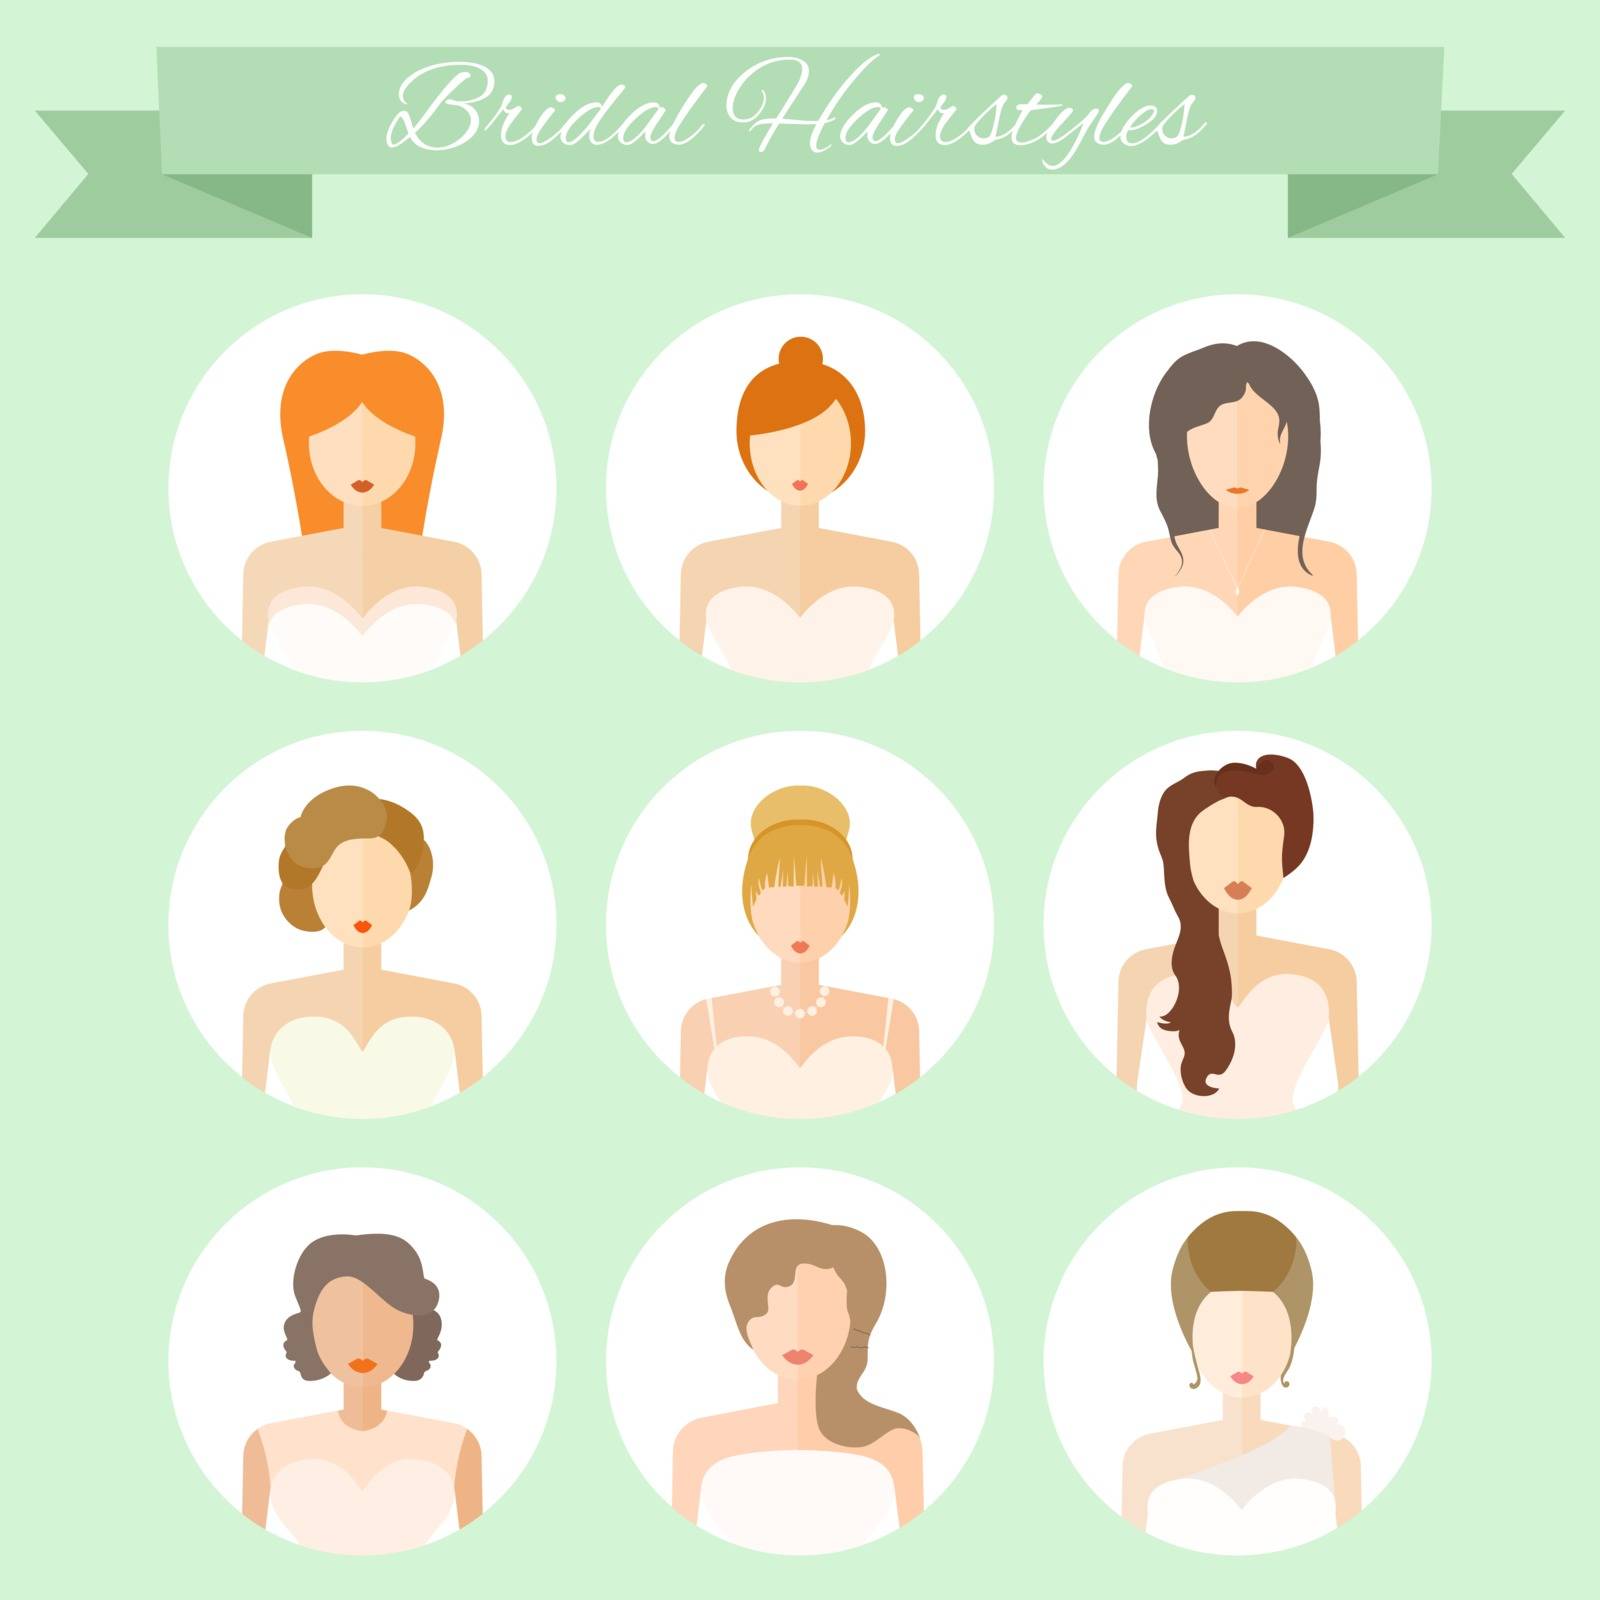 Bridal hairstyle - modern flat icons of wedding fashion. Young women with different hair cuts and hair dresses. Bridal vector.